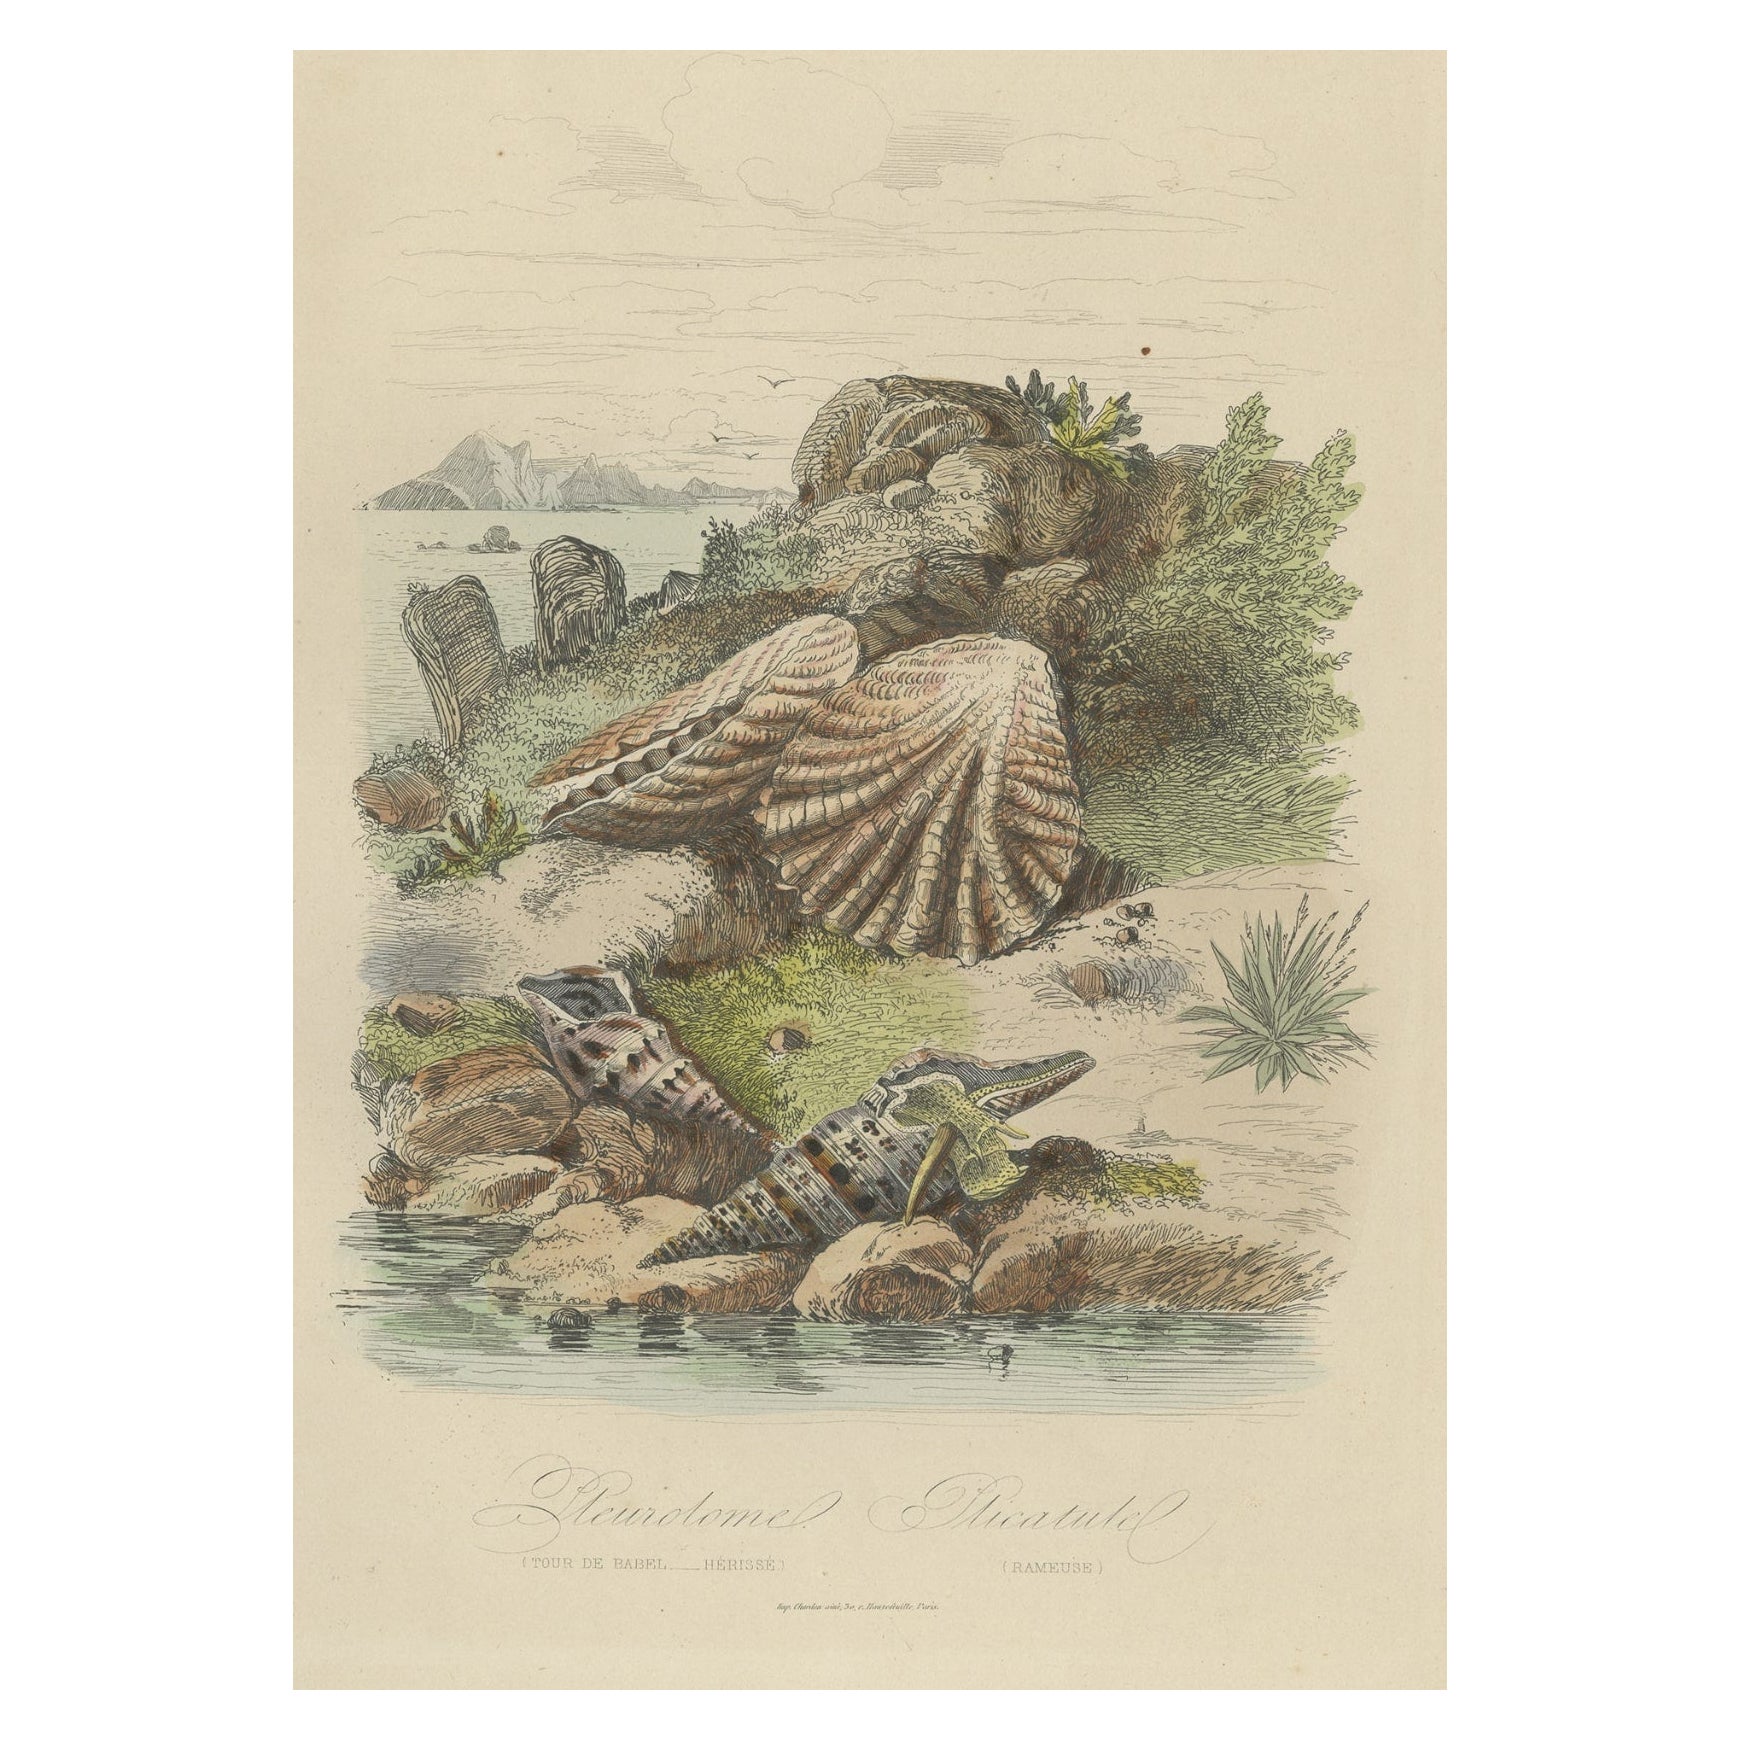 Antique Print of a Sea Snail and Other Mollusc, 1854